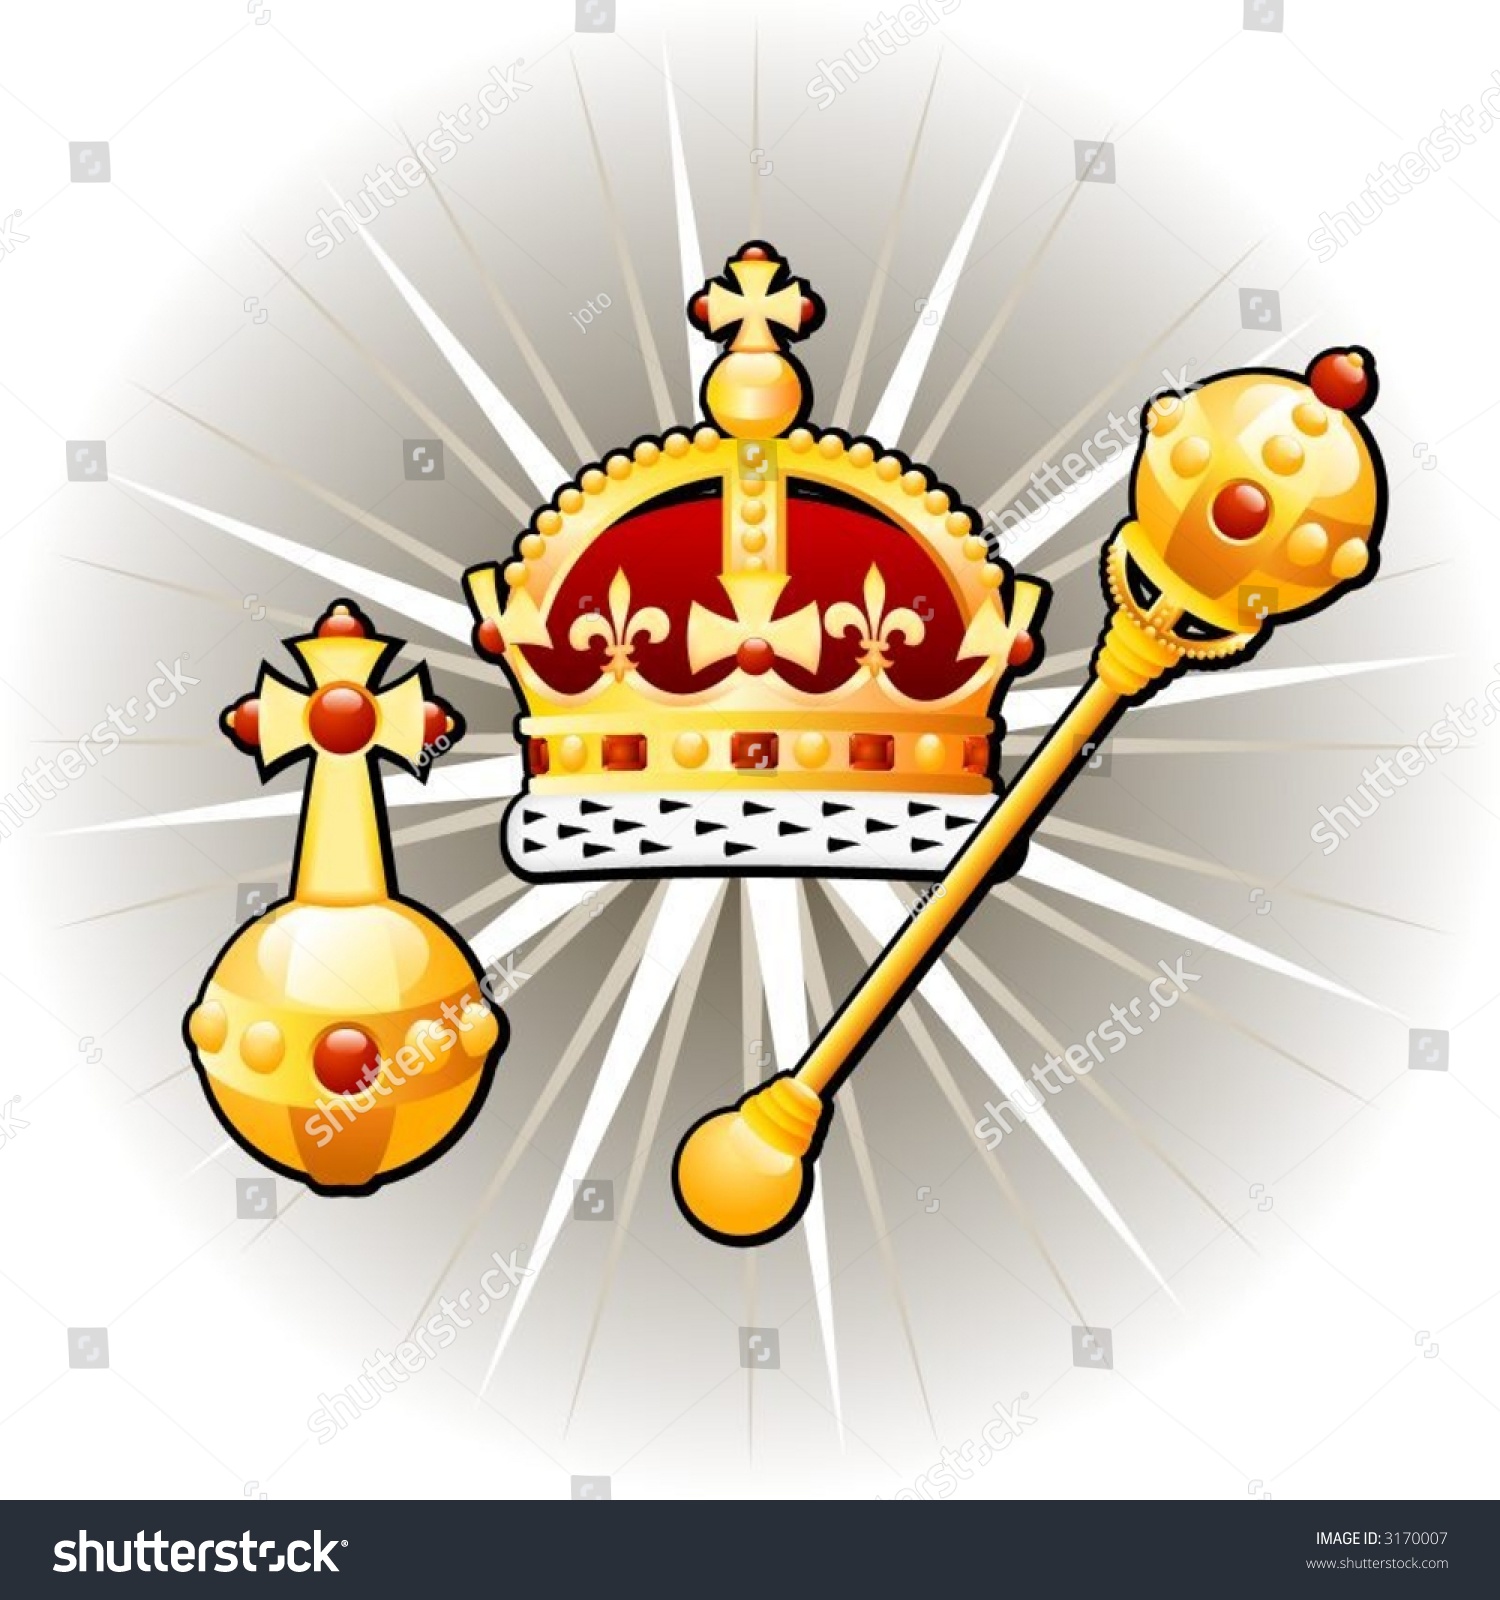 crown jewels clipart - photo #7